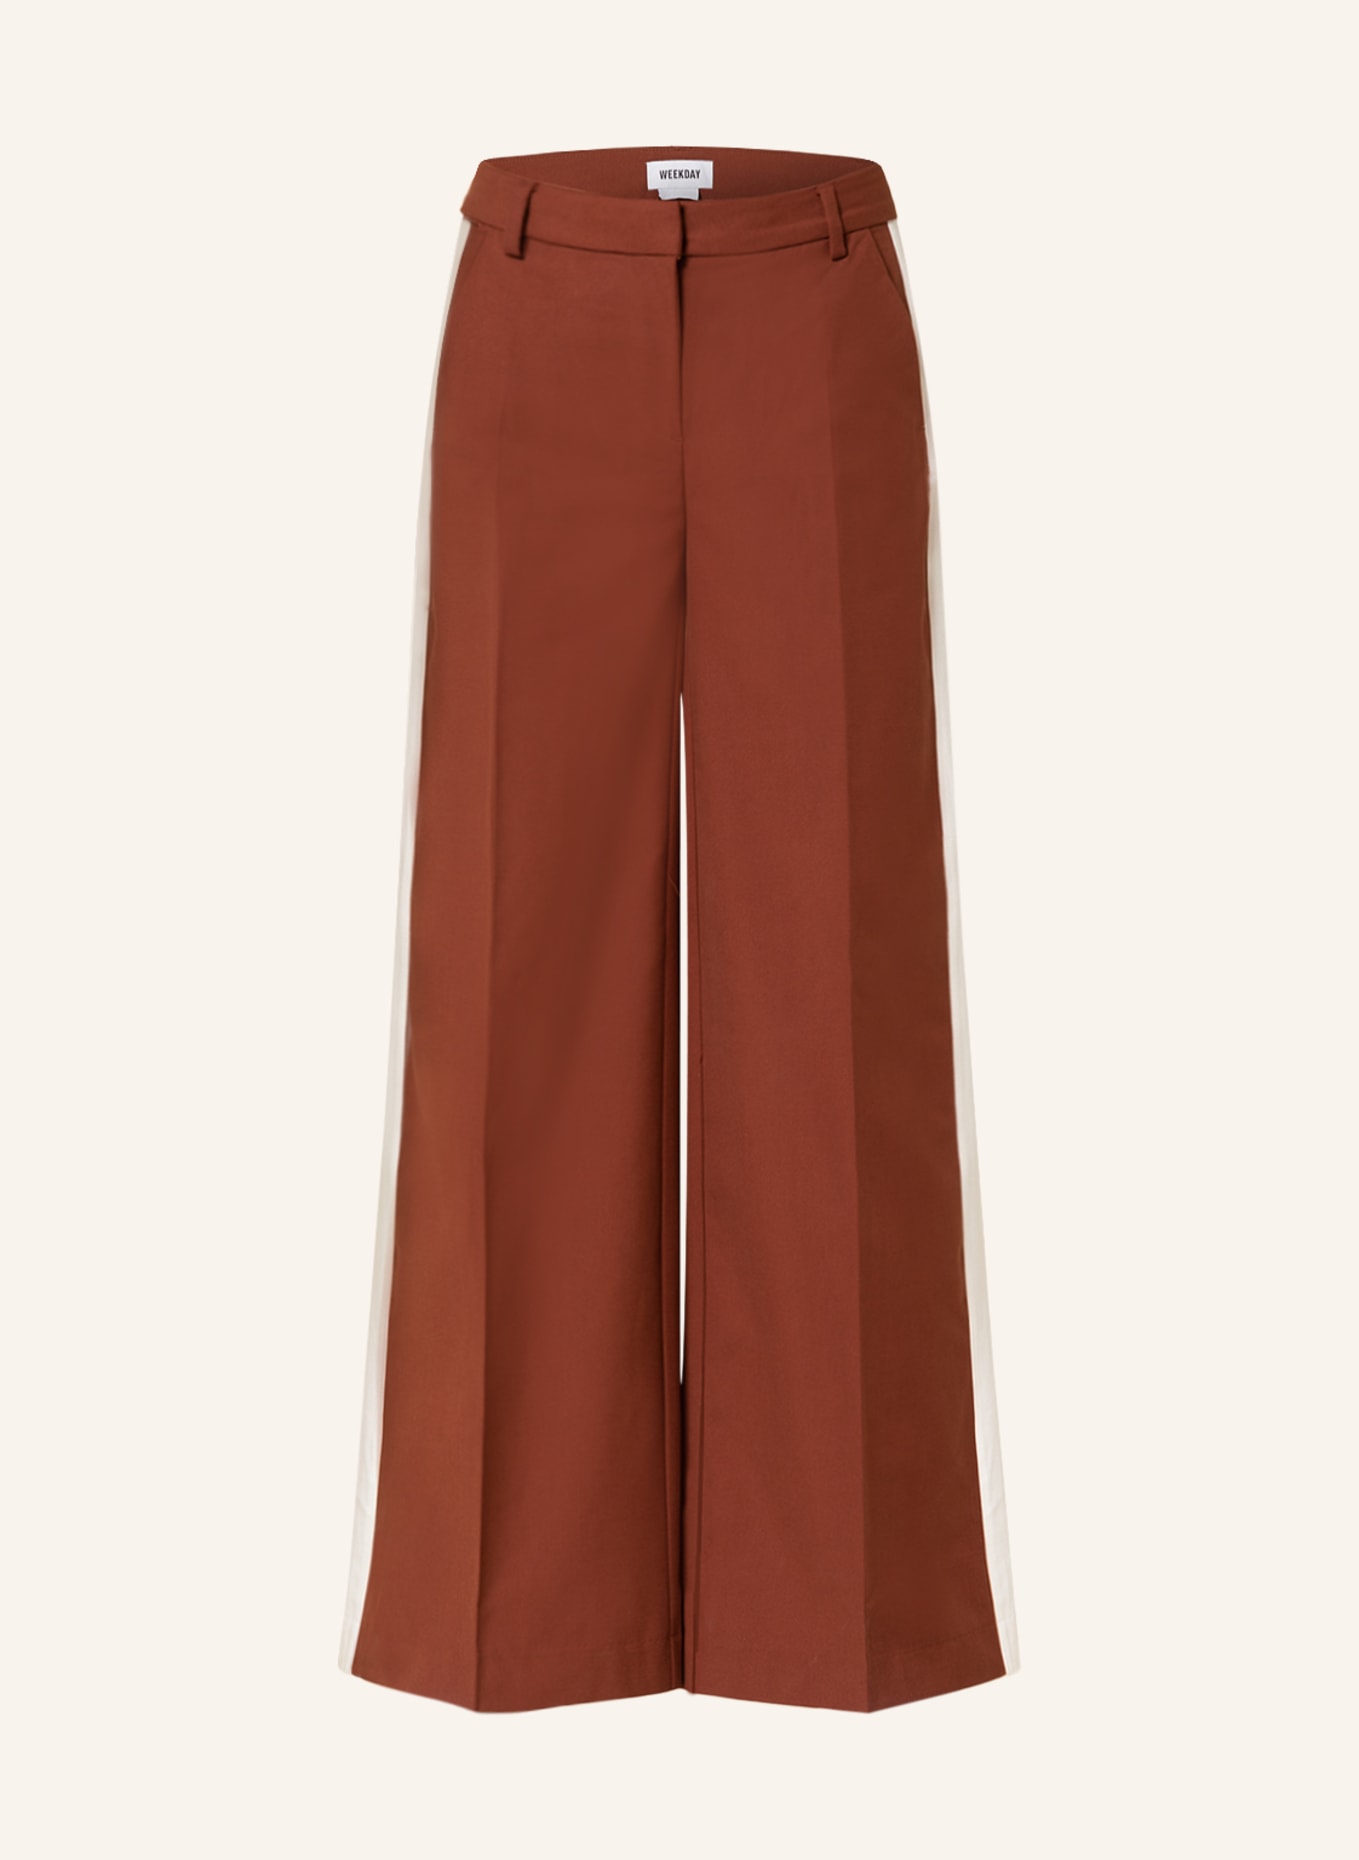 WEEKDAY Wide leg trousers CALLIE with tuxedo stripes, Color: BROWN/ ECRU (Image 1)